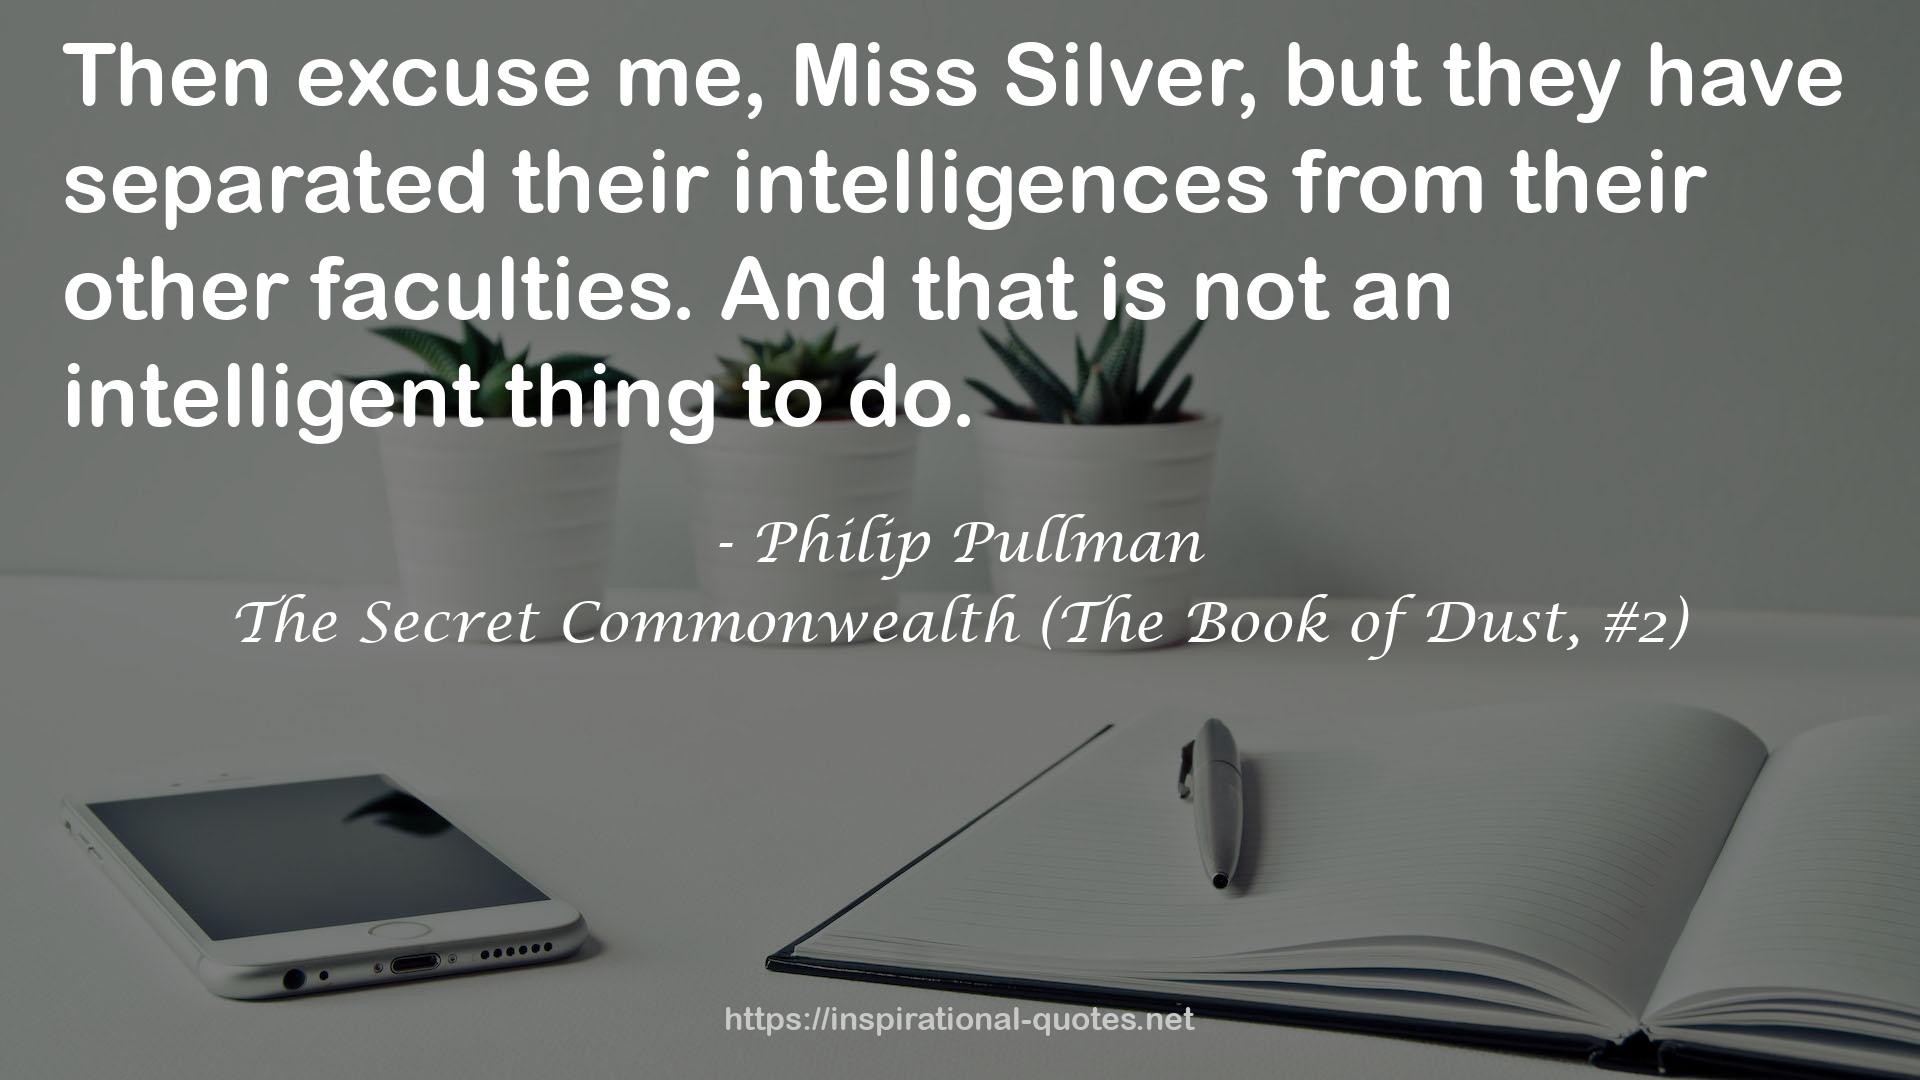 The Secret Commonwealth (The Book of Dust, #2) QUOTES